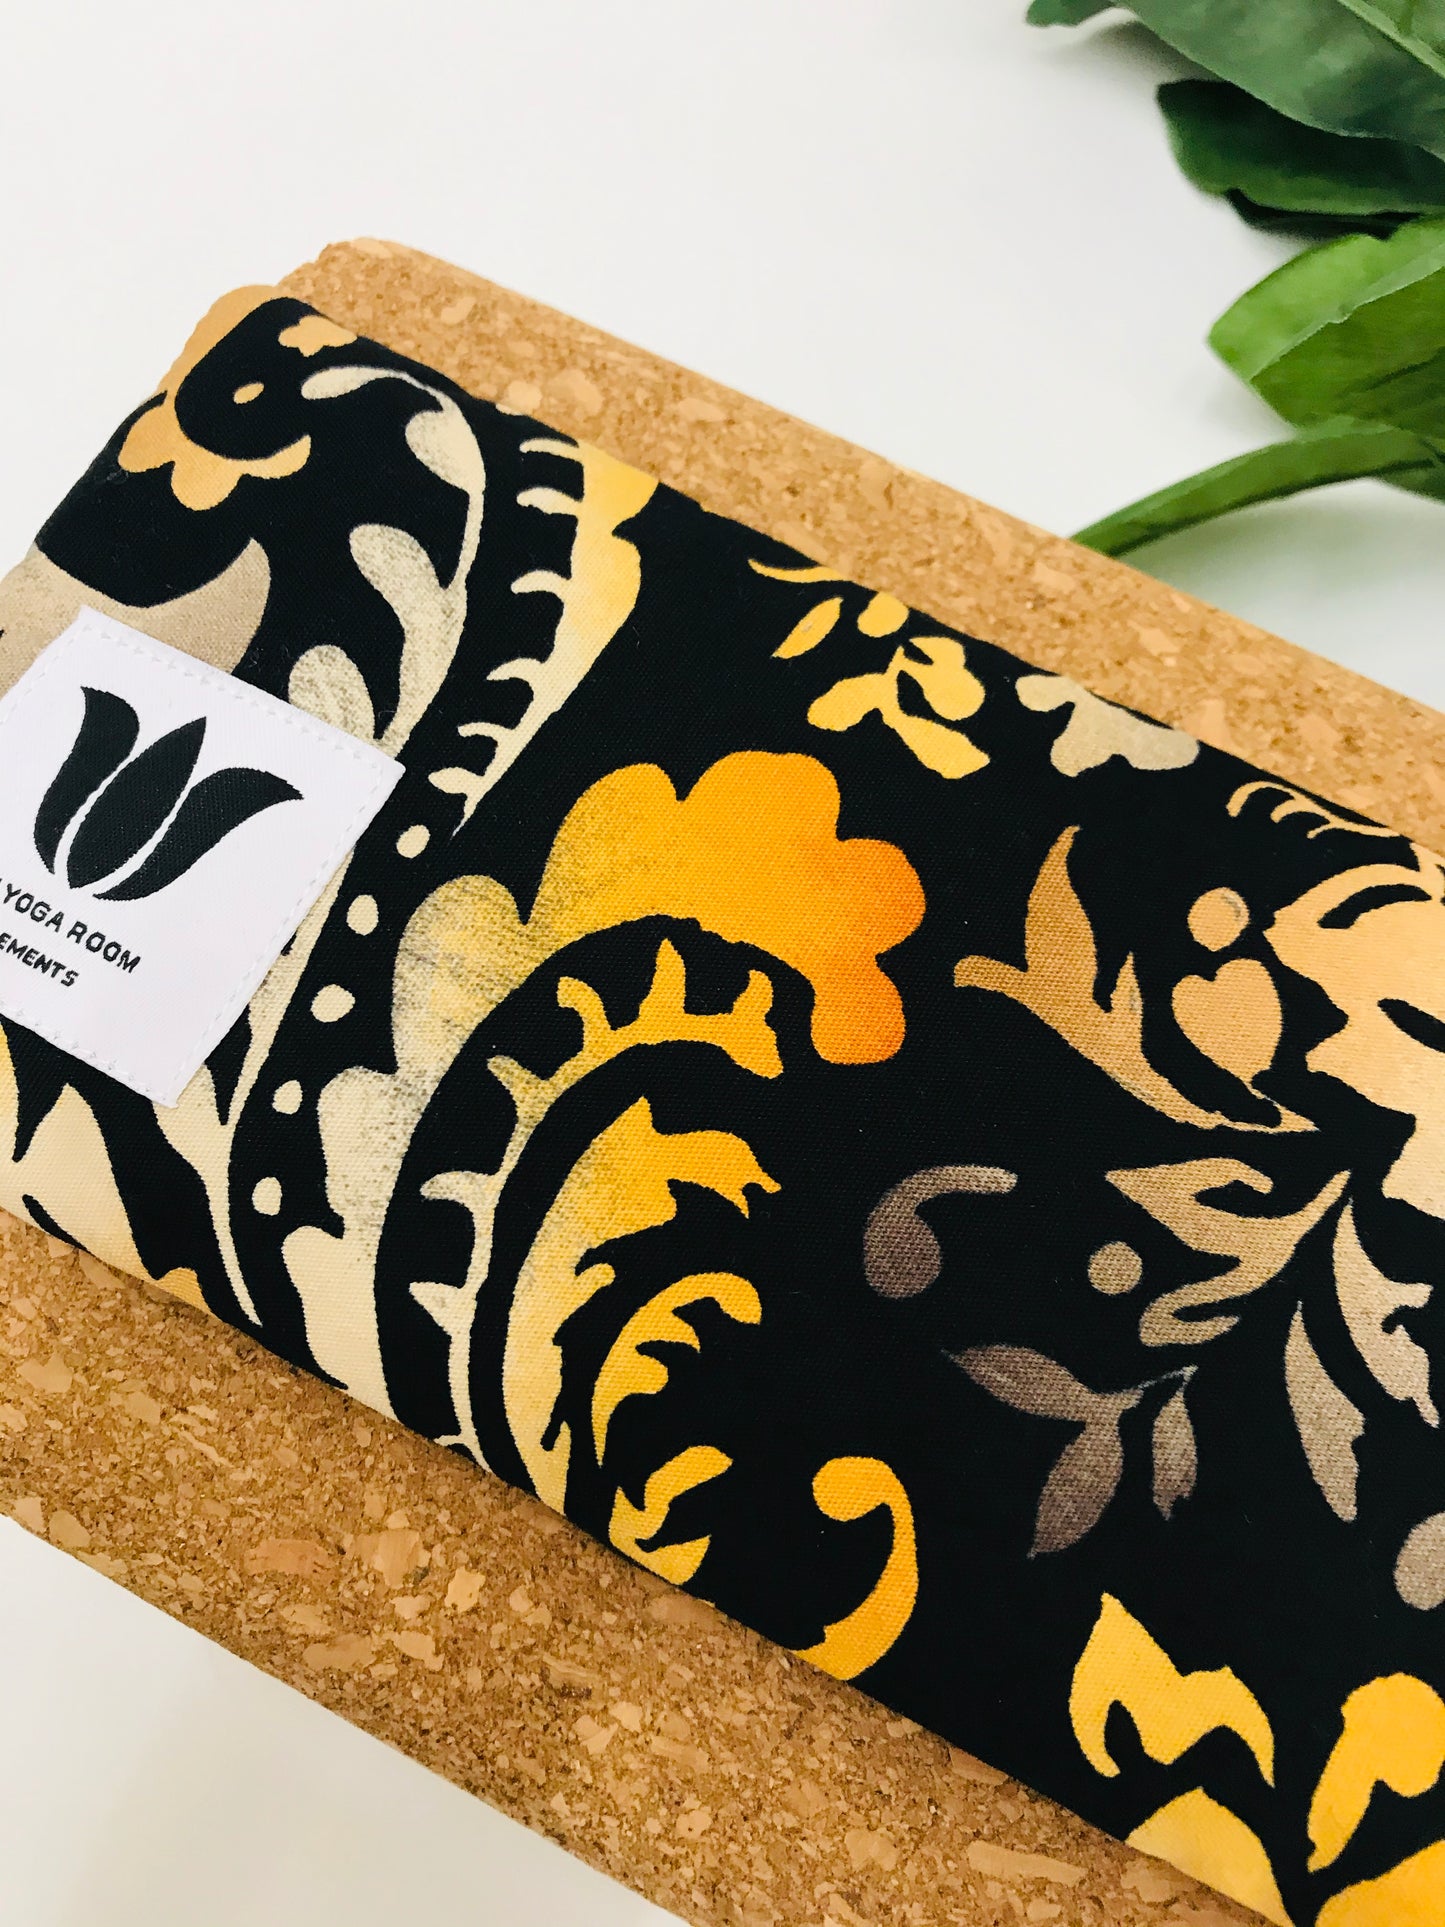 Yoga eye pillow, unscented, therapeutically weighted to soothe eye strain and stress or enhance your savasana. Handcrafted in Canada by My Yoga Room Elements. Autumn damask print and bamboo fabric.